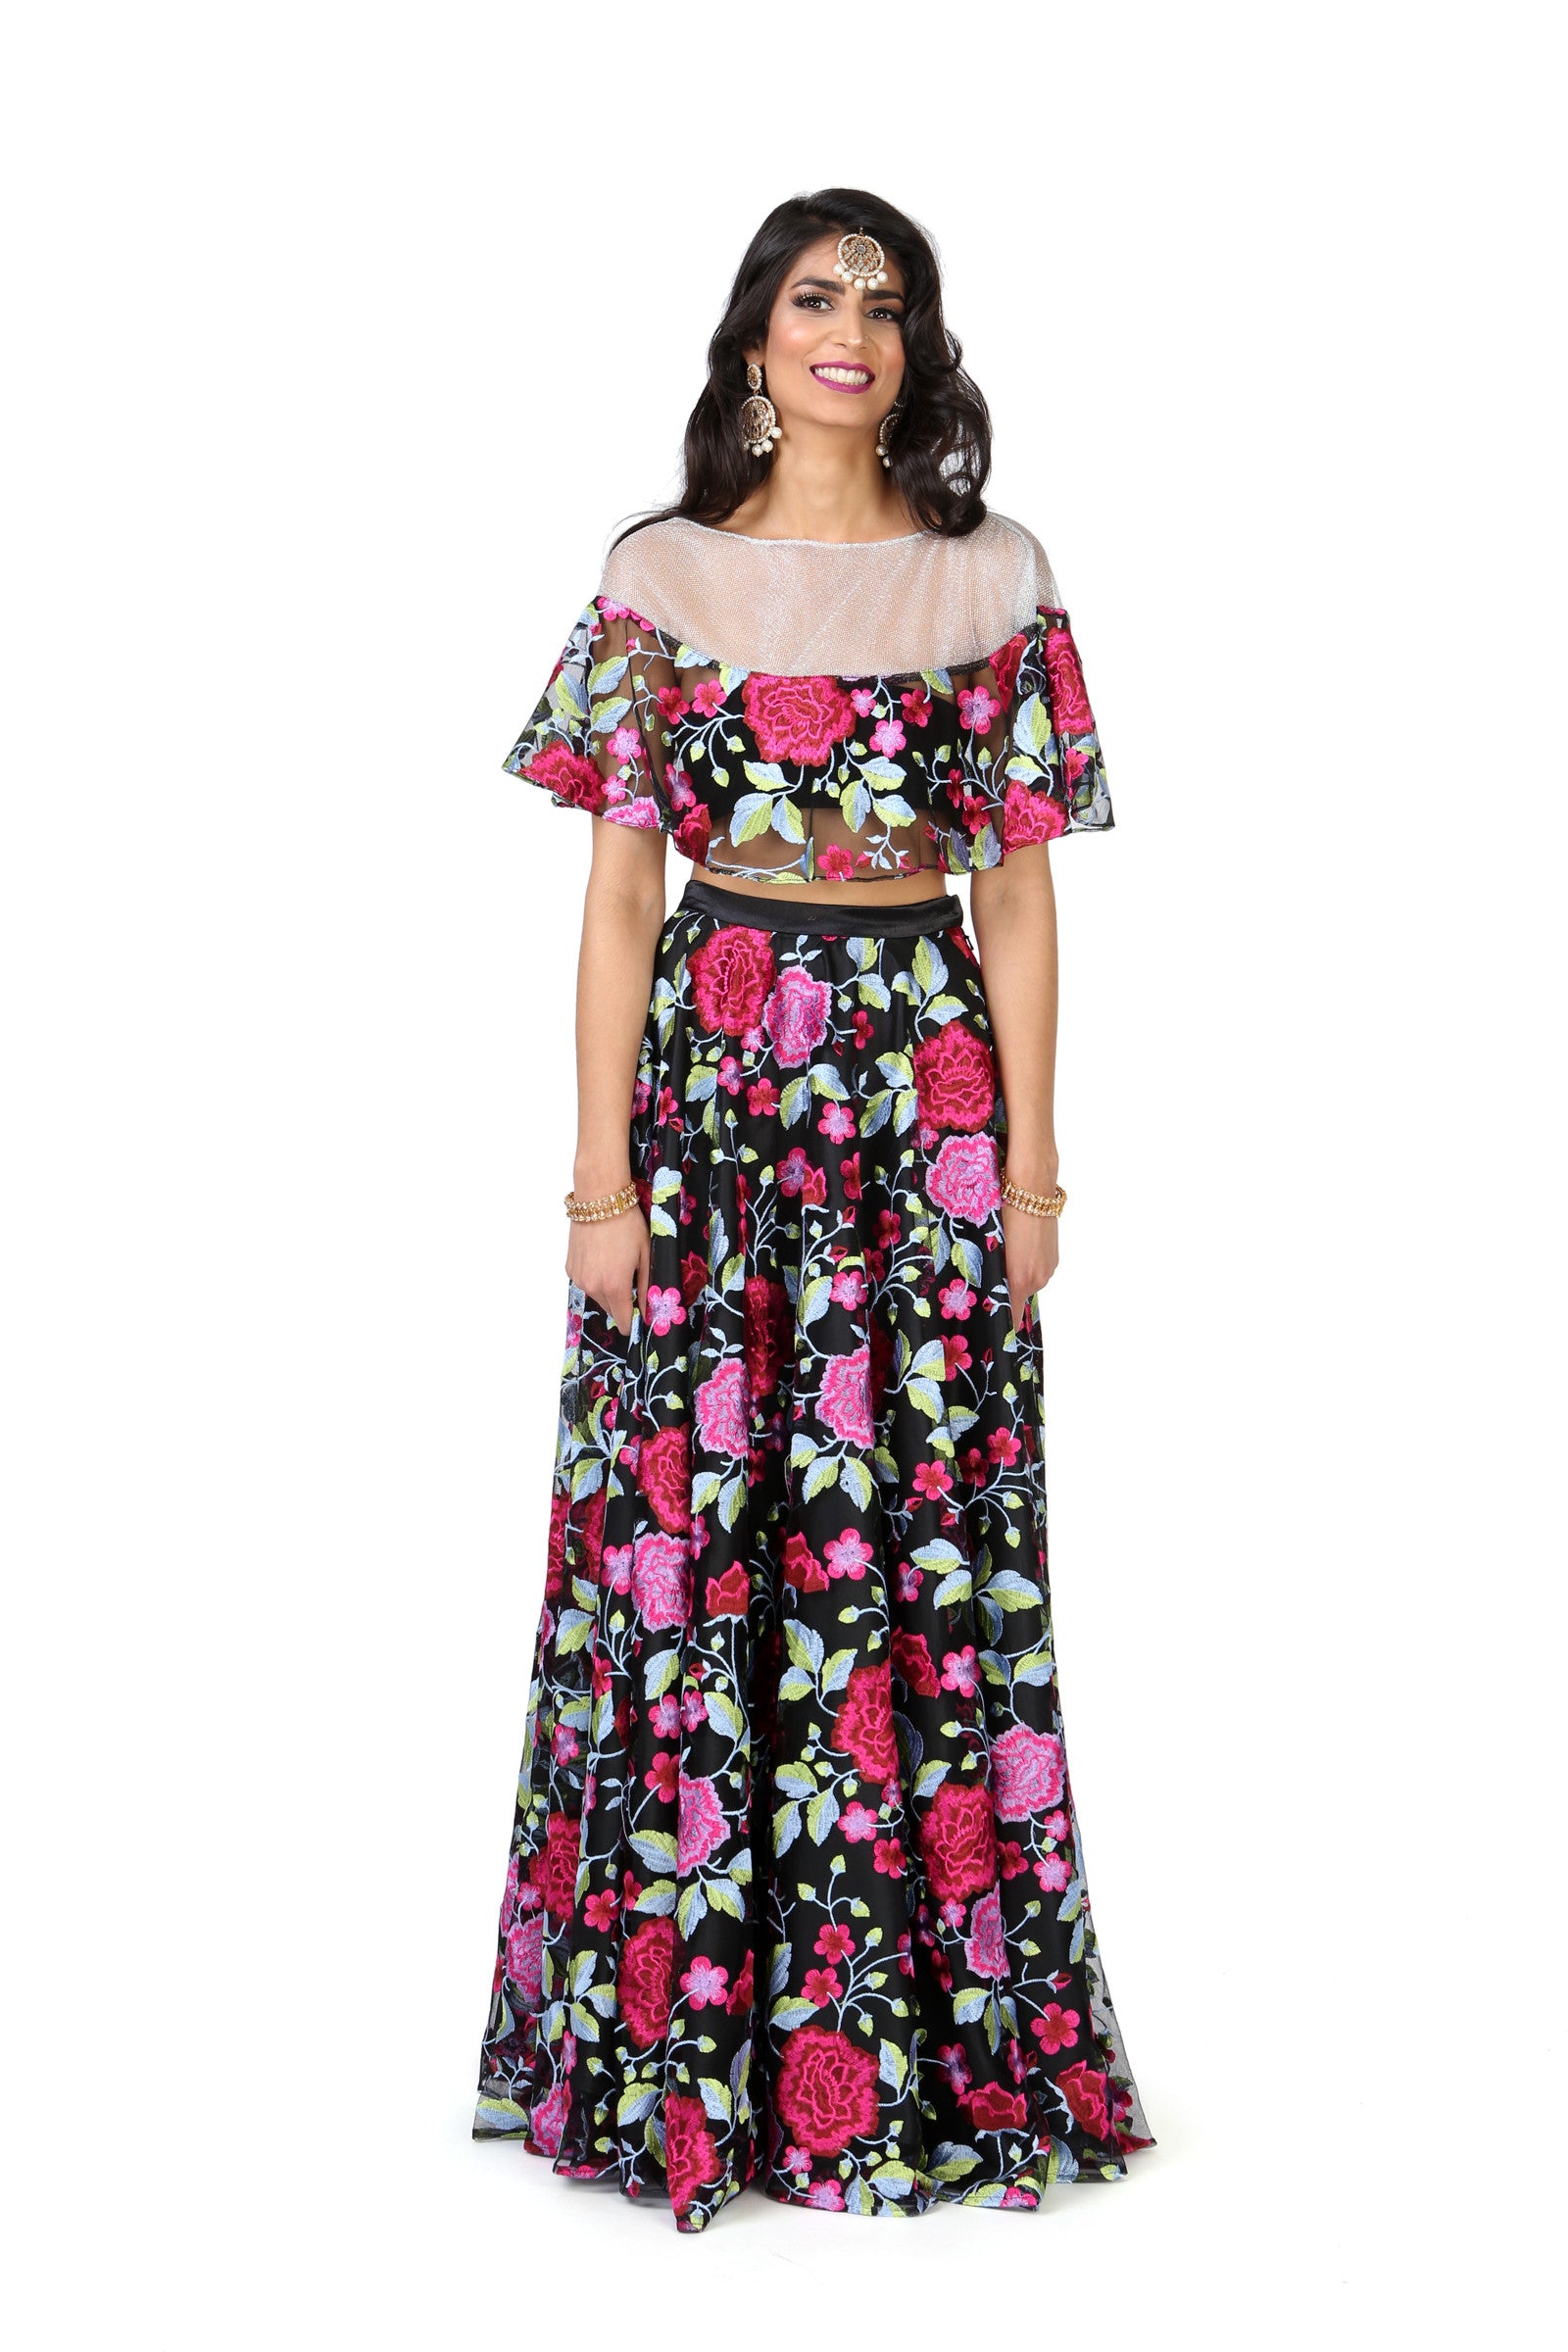 Black and Pink Embroidered Floral Floor Length Lehenga Skirt - Front View - Harleen Kaur - Ethically Made Womenswear